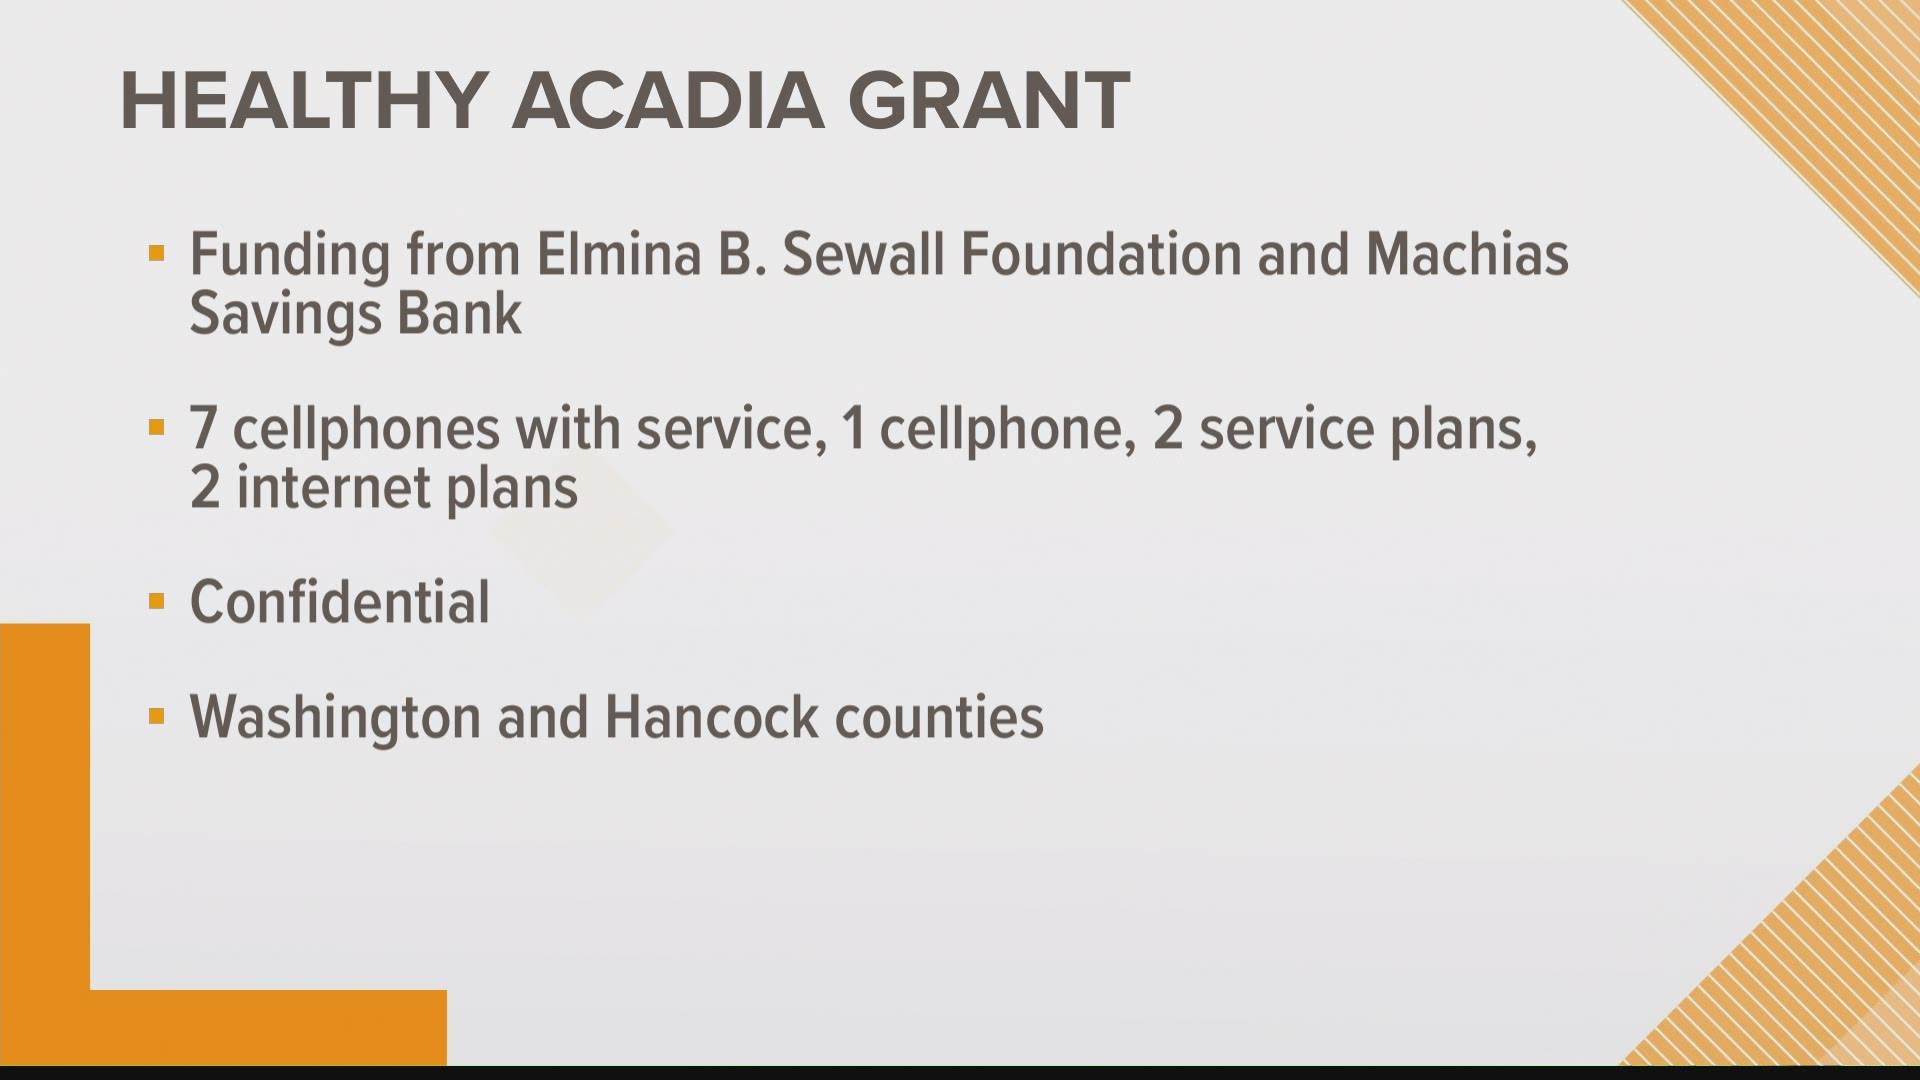 Healthy Acadia is using funding from the Elmina B. Sewall Foundation and Machias Savings Bank to buy cellphones for people in recovery who need telehealth options.